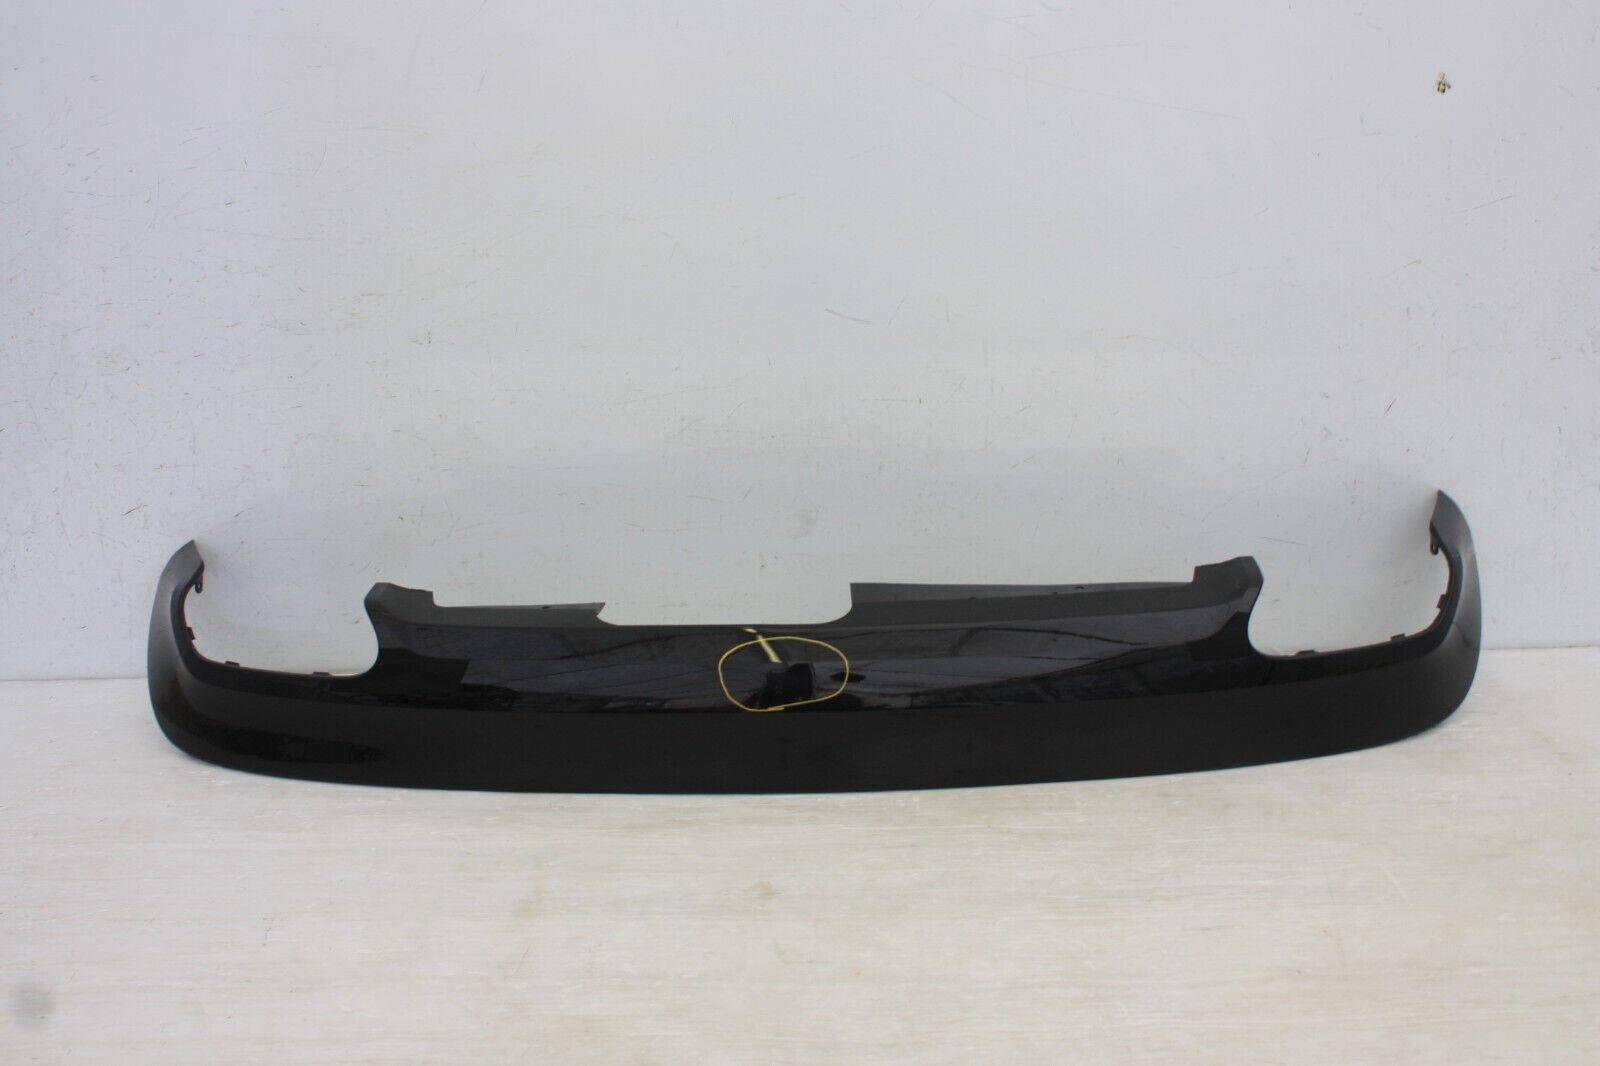 Volvo XC60 Rear Bumper Lower Section 2015 ON 31425207 Genuine 175424916700